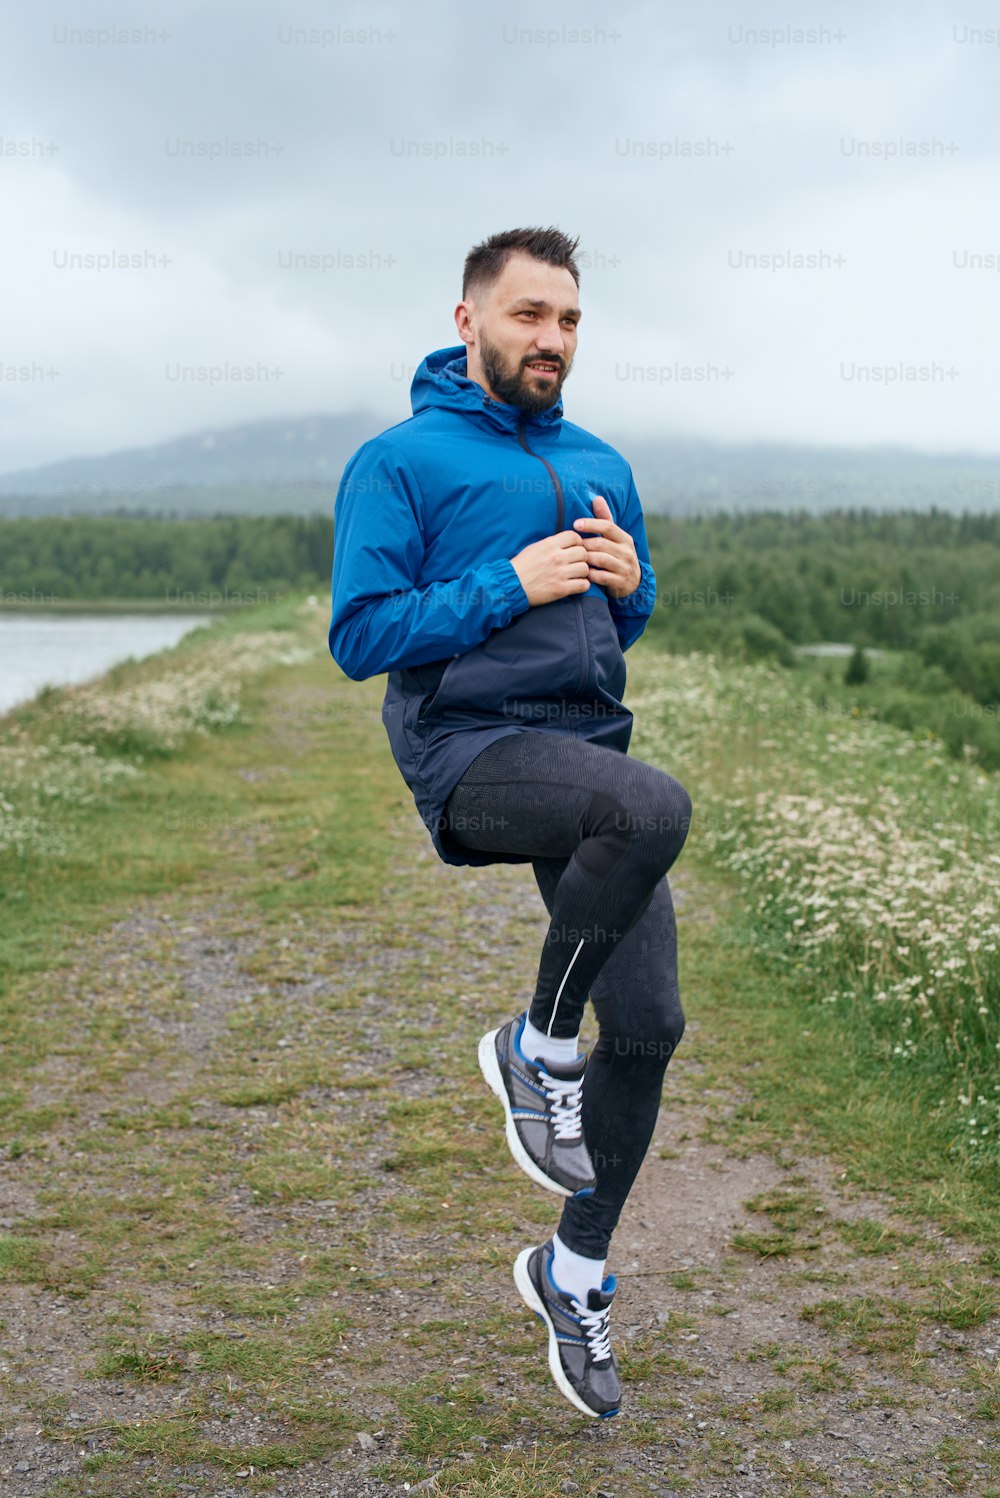 Mid age sportsman exercising outdoor in summer, on gloomy day, standing at the road with scenic view, doing warm up stretching, wearing blue jacket, he has a beard